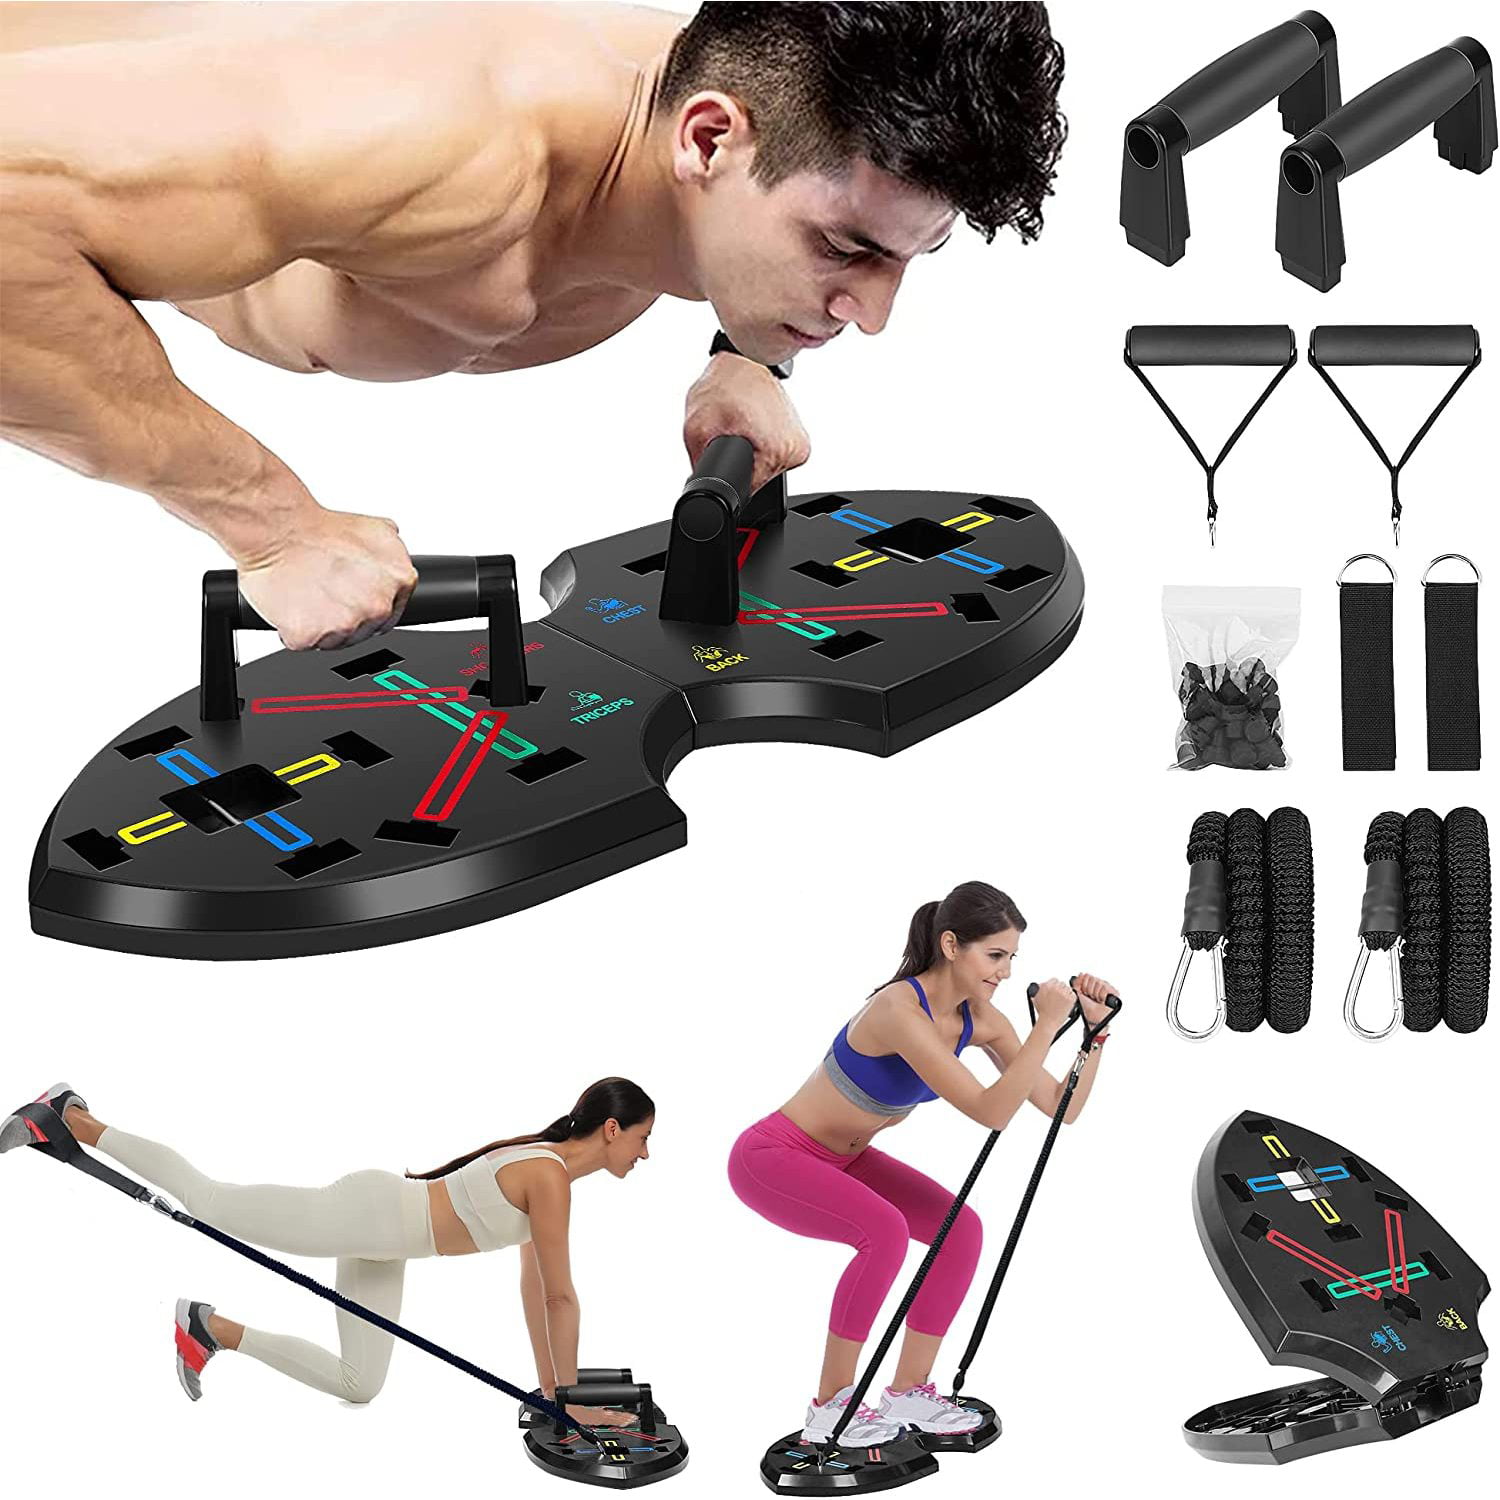 Ultimate Push Up Board, Portable at Home Gym, Strength Training